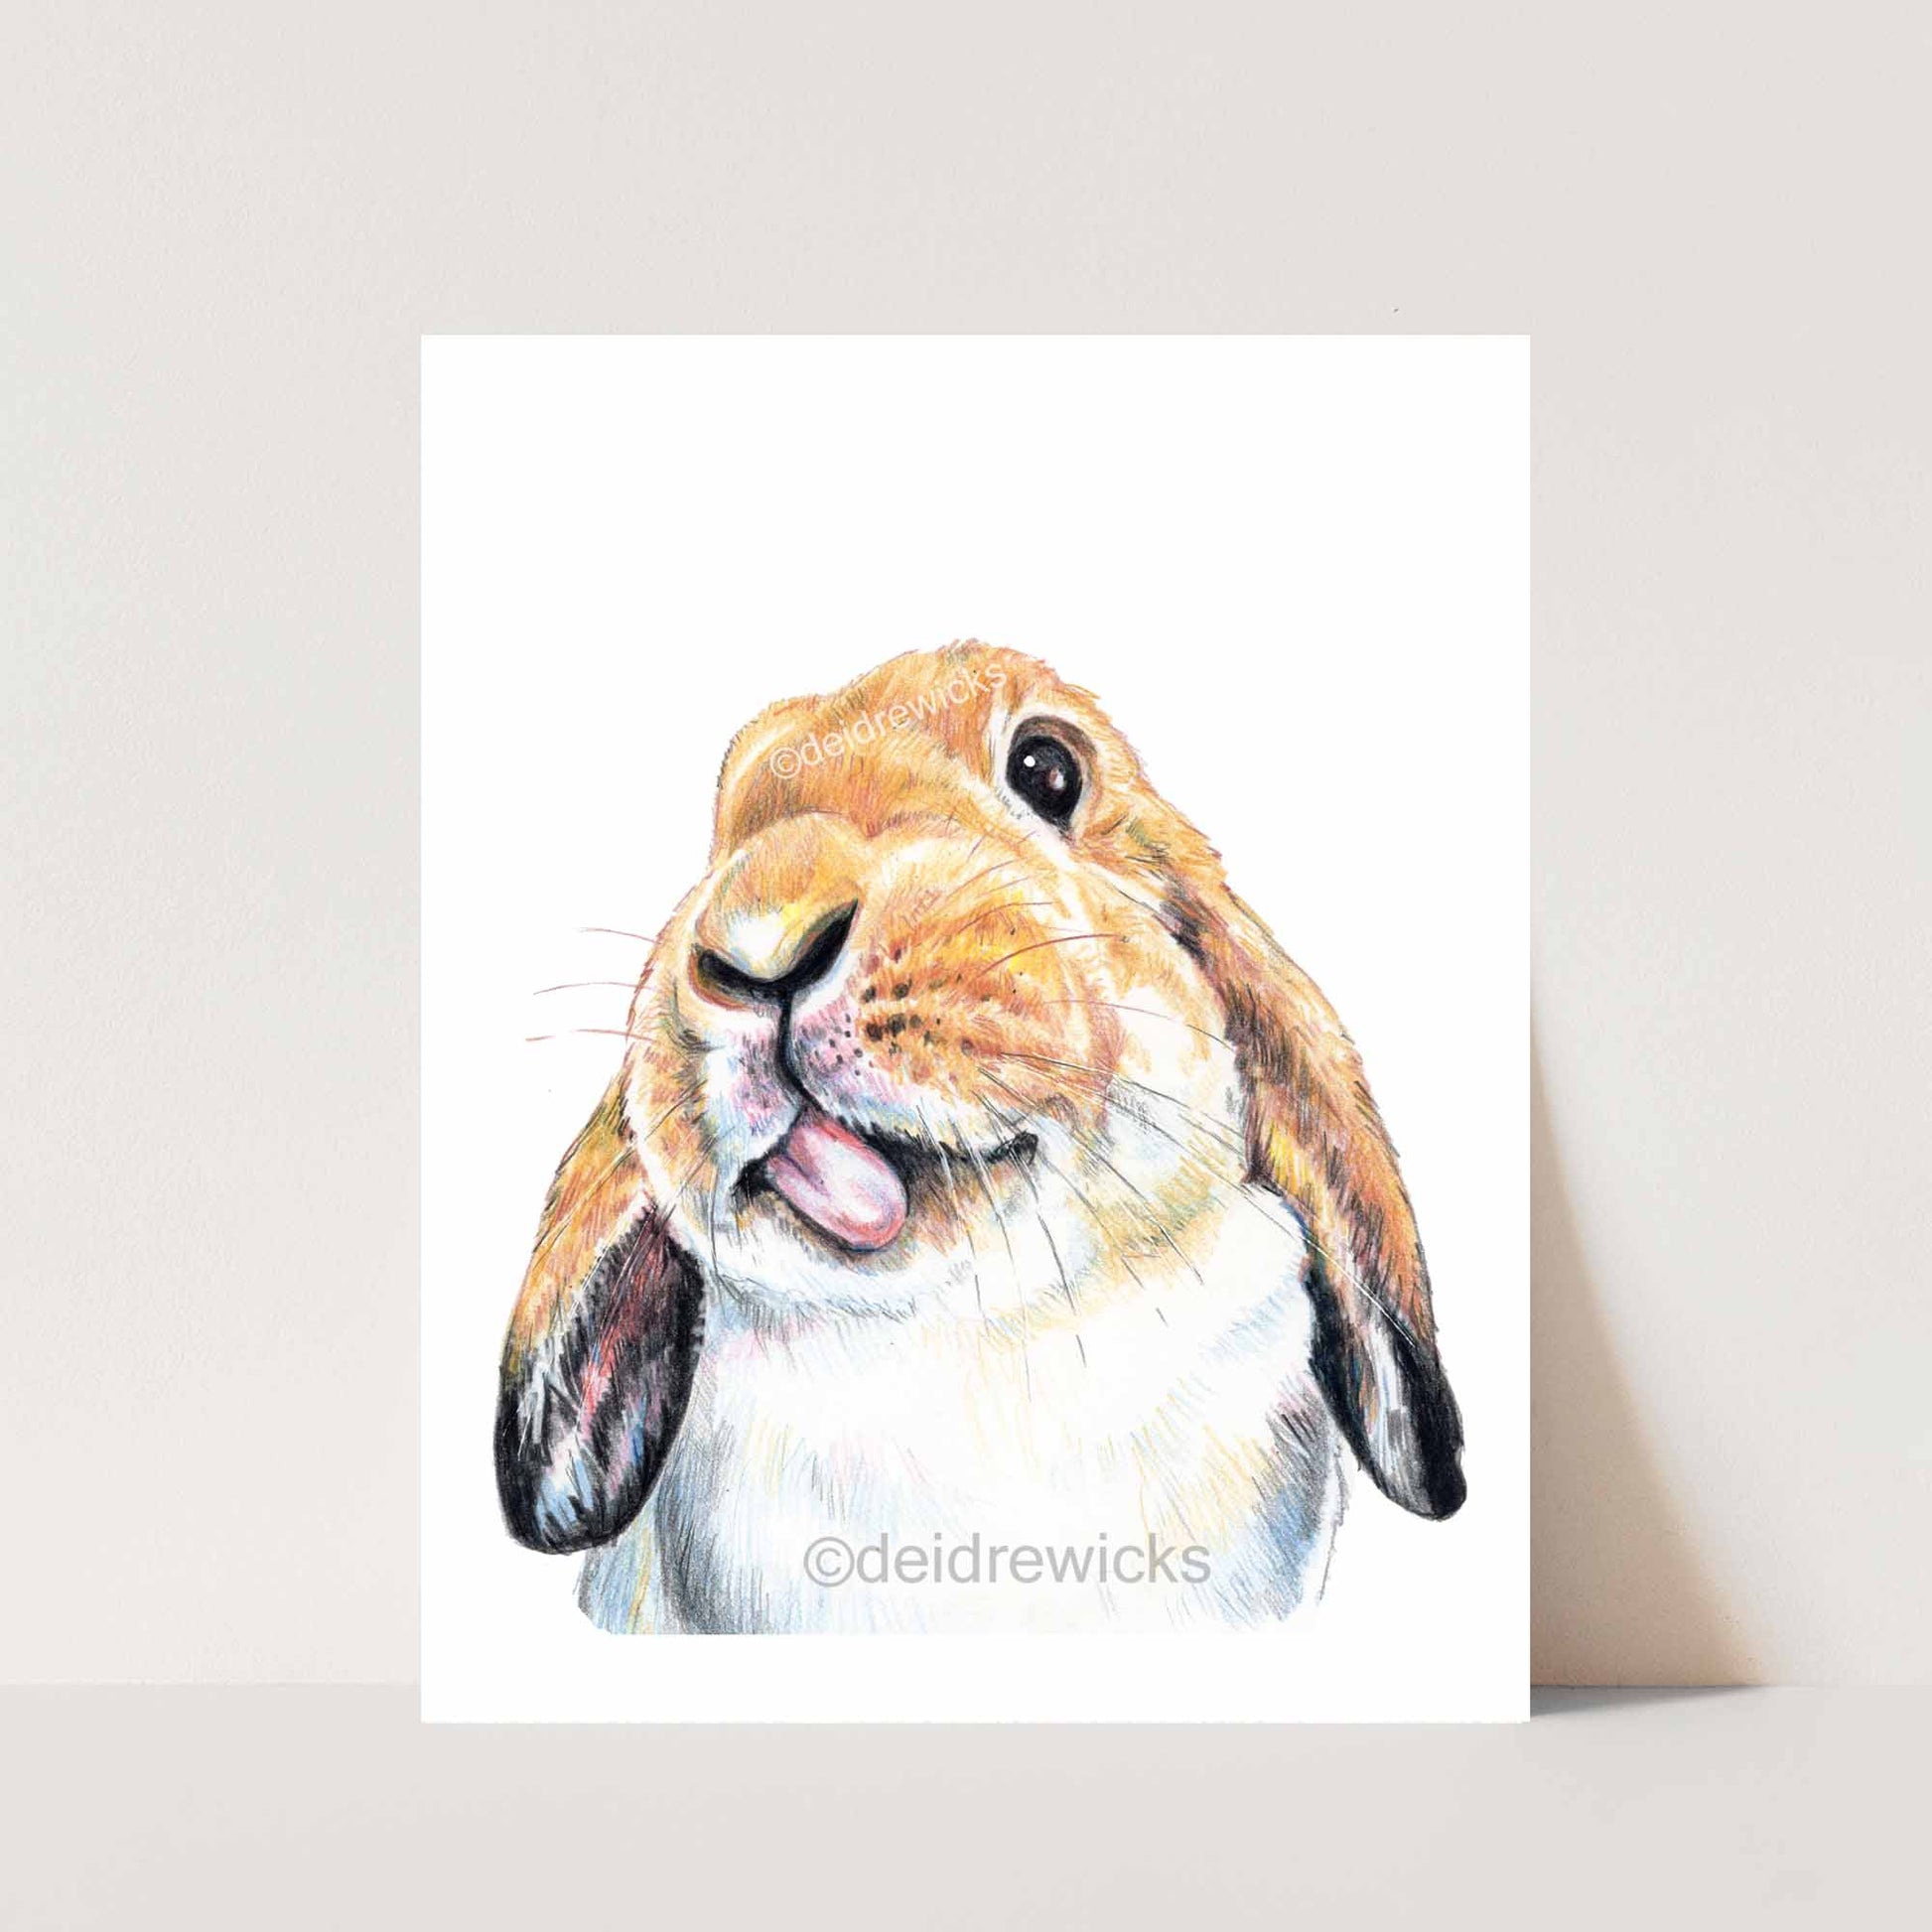 Print of an original pencil crayon drawing of a lop eared bunny rabbit sticking his tongue out. By artist Deidre Wicks